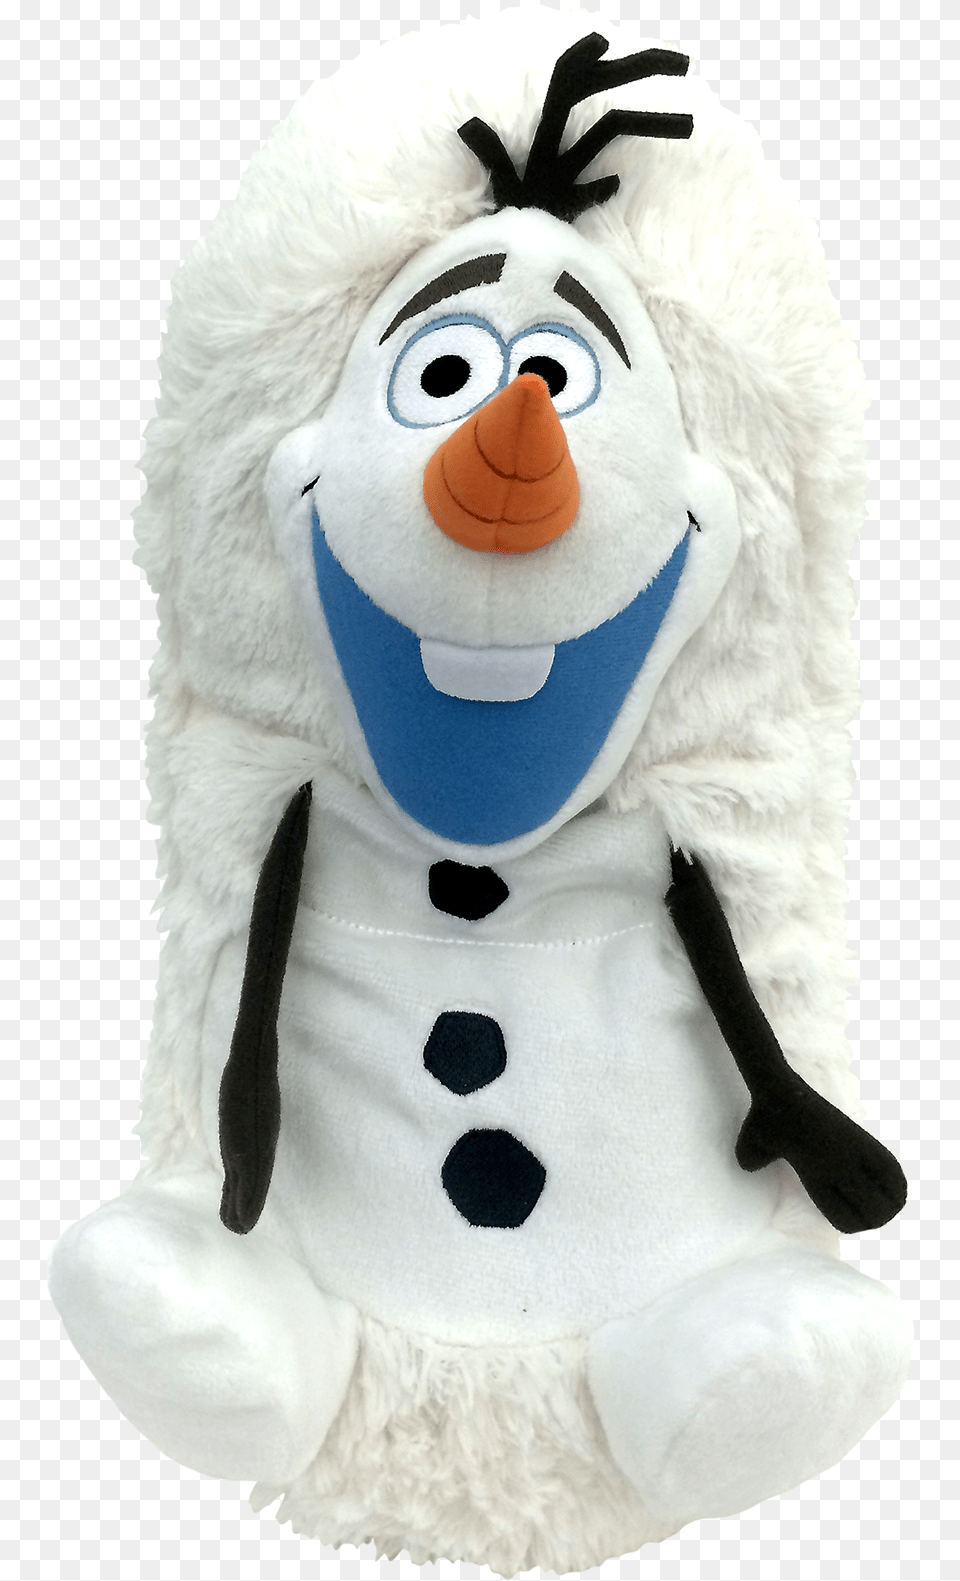 Upc Stuffed Toy, Plush, Nature, Outdoors, Snow Png Image